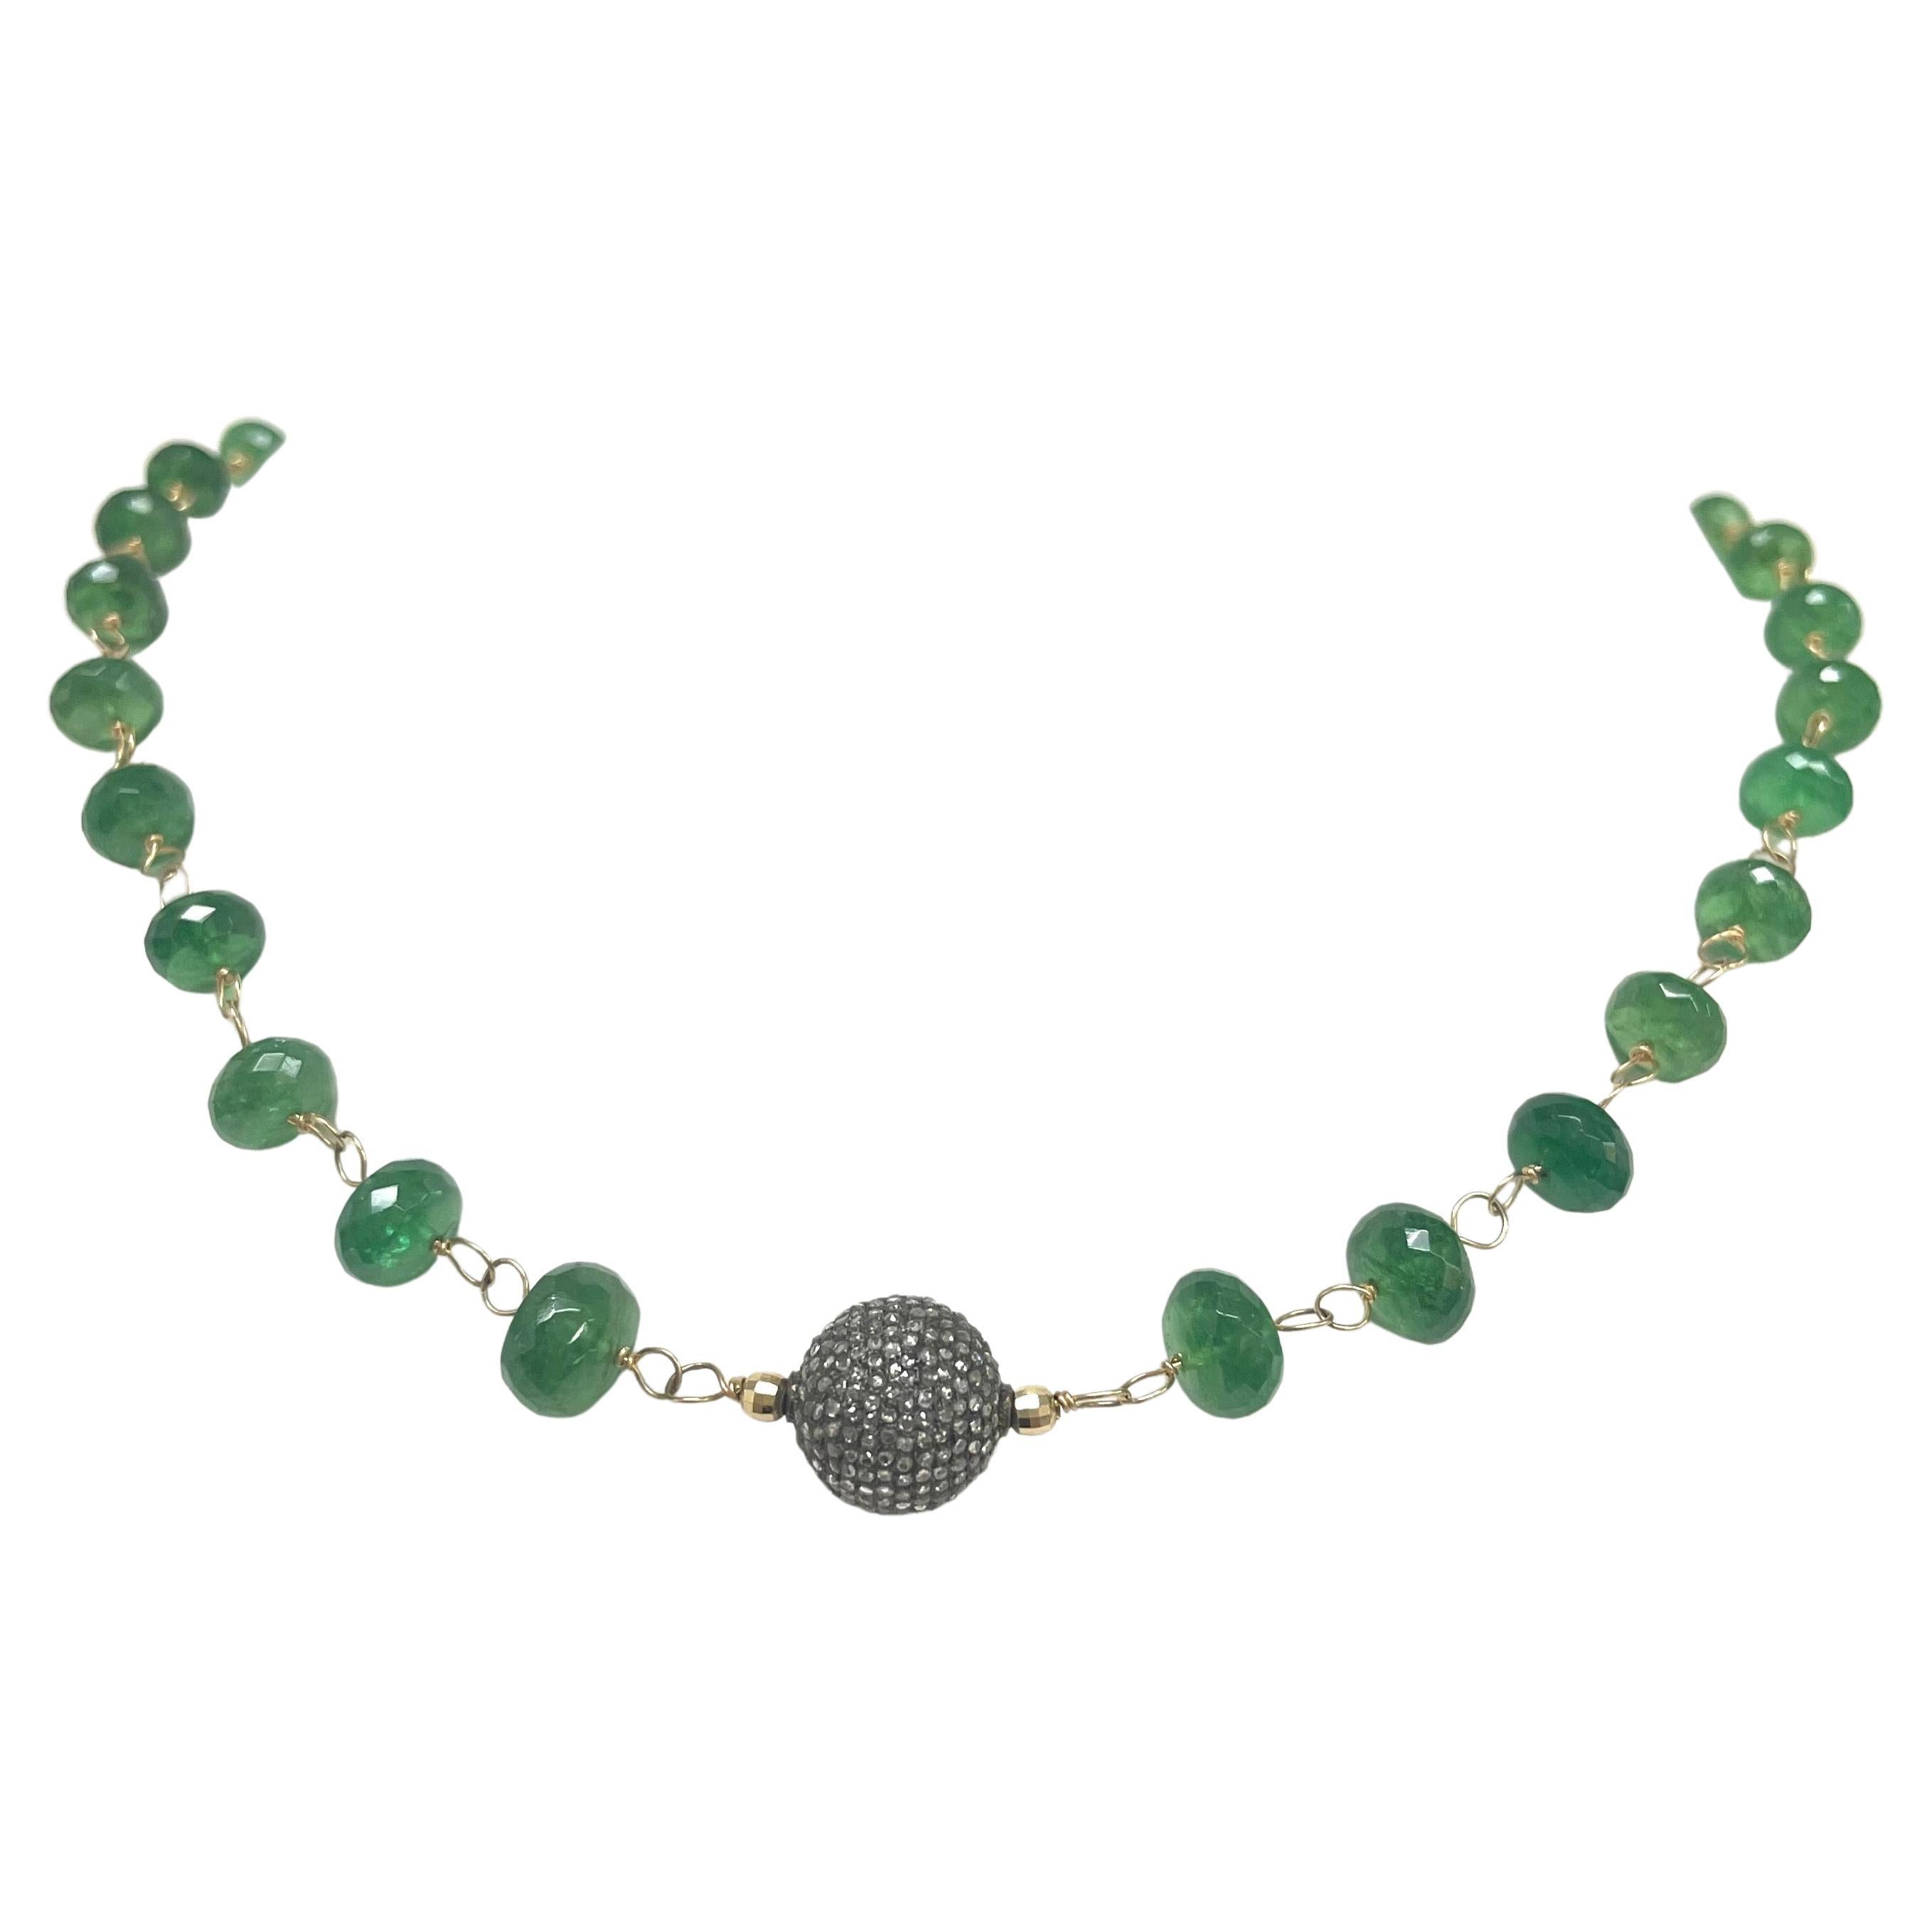 Description
Vibrant green, rare Tsavorite Garnet faceted rondelles, individually hand wrapped with 14k yellow gold wire and embellished with a 12.5mm pave diamond ball. Item # N3748
For a stylish layered look, add an additional matching Necklace